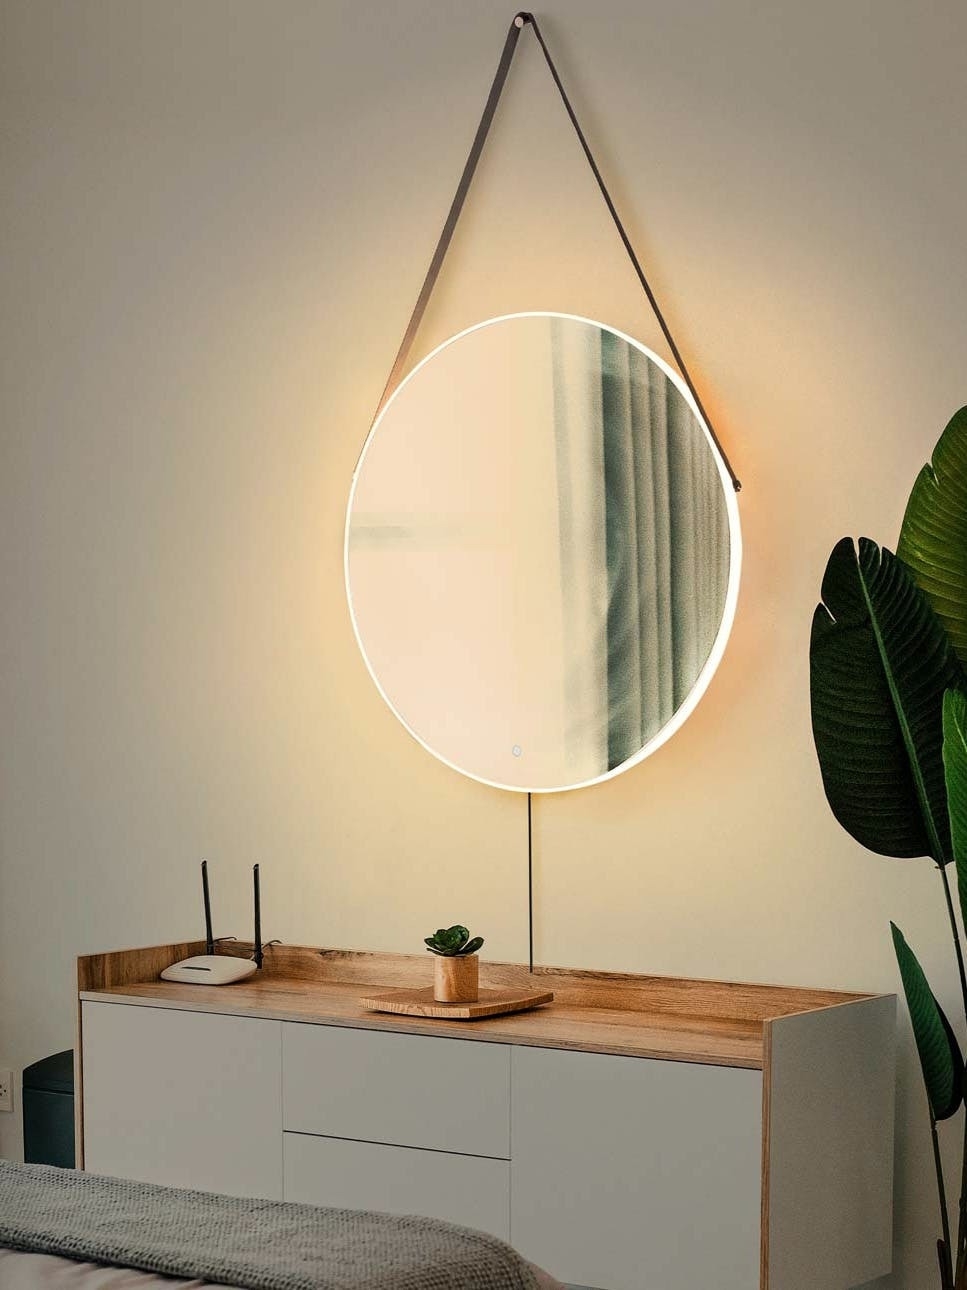 A hanging round mirror with a light over a dresser.